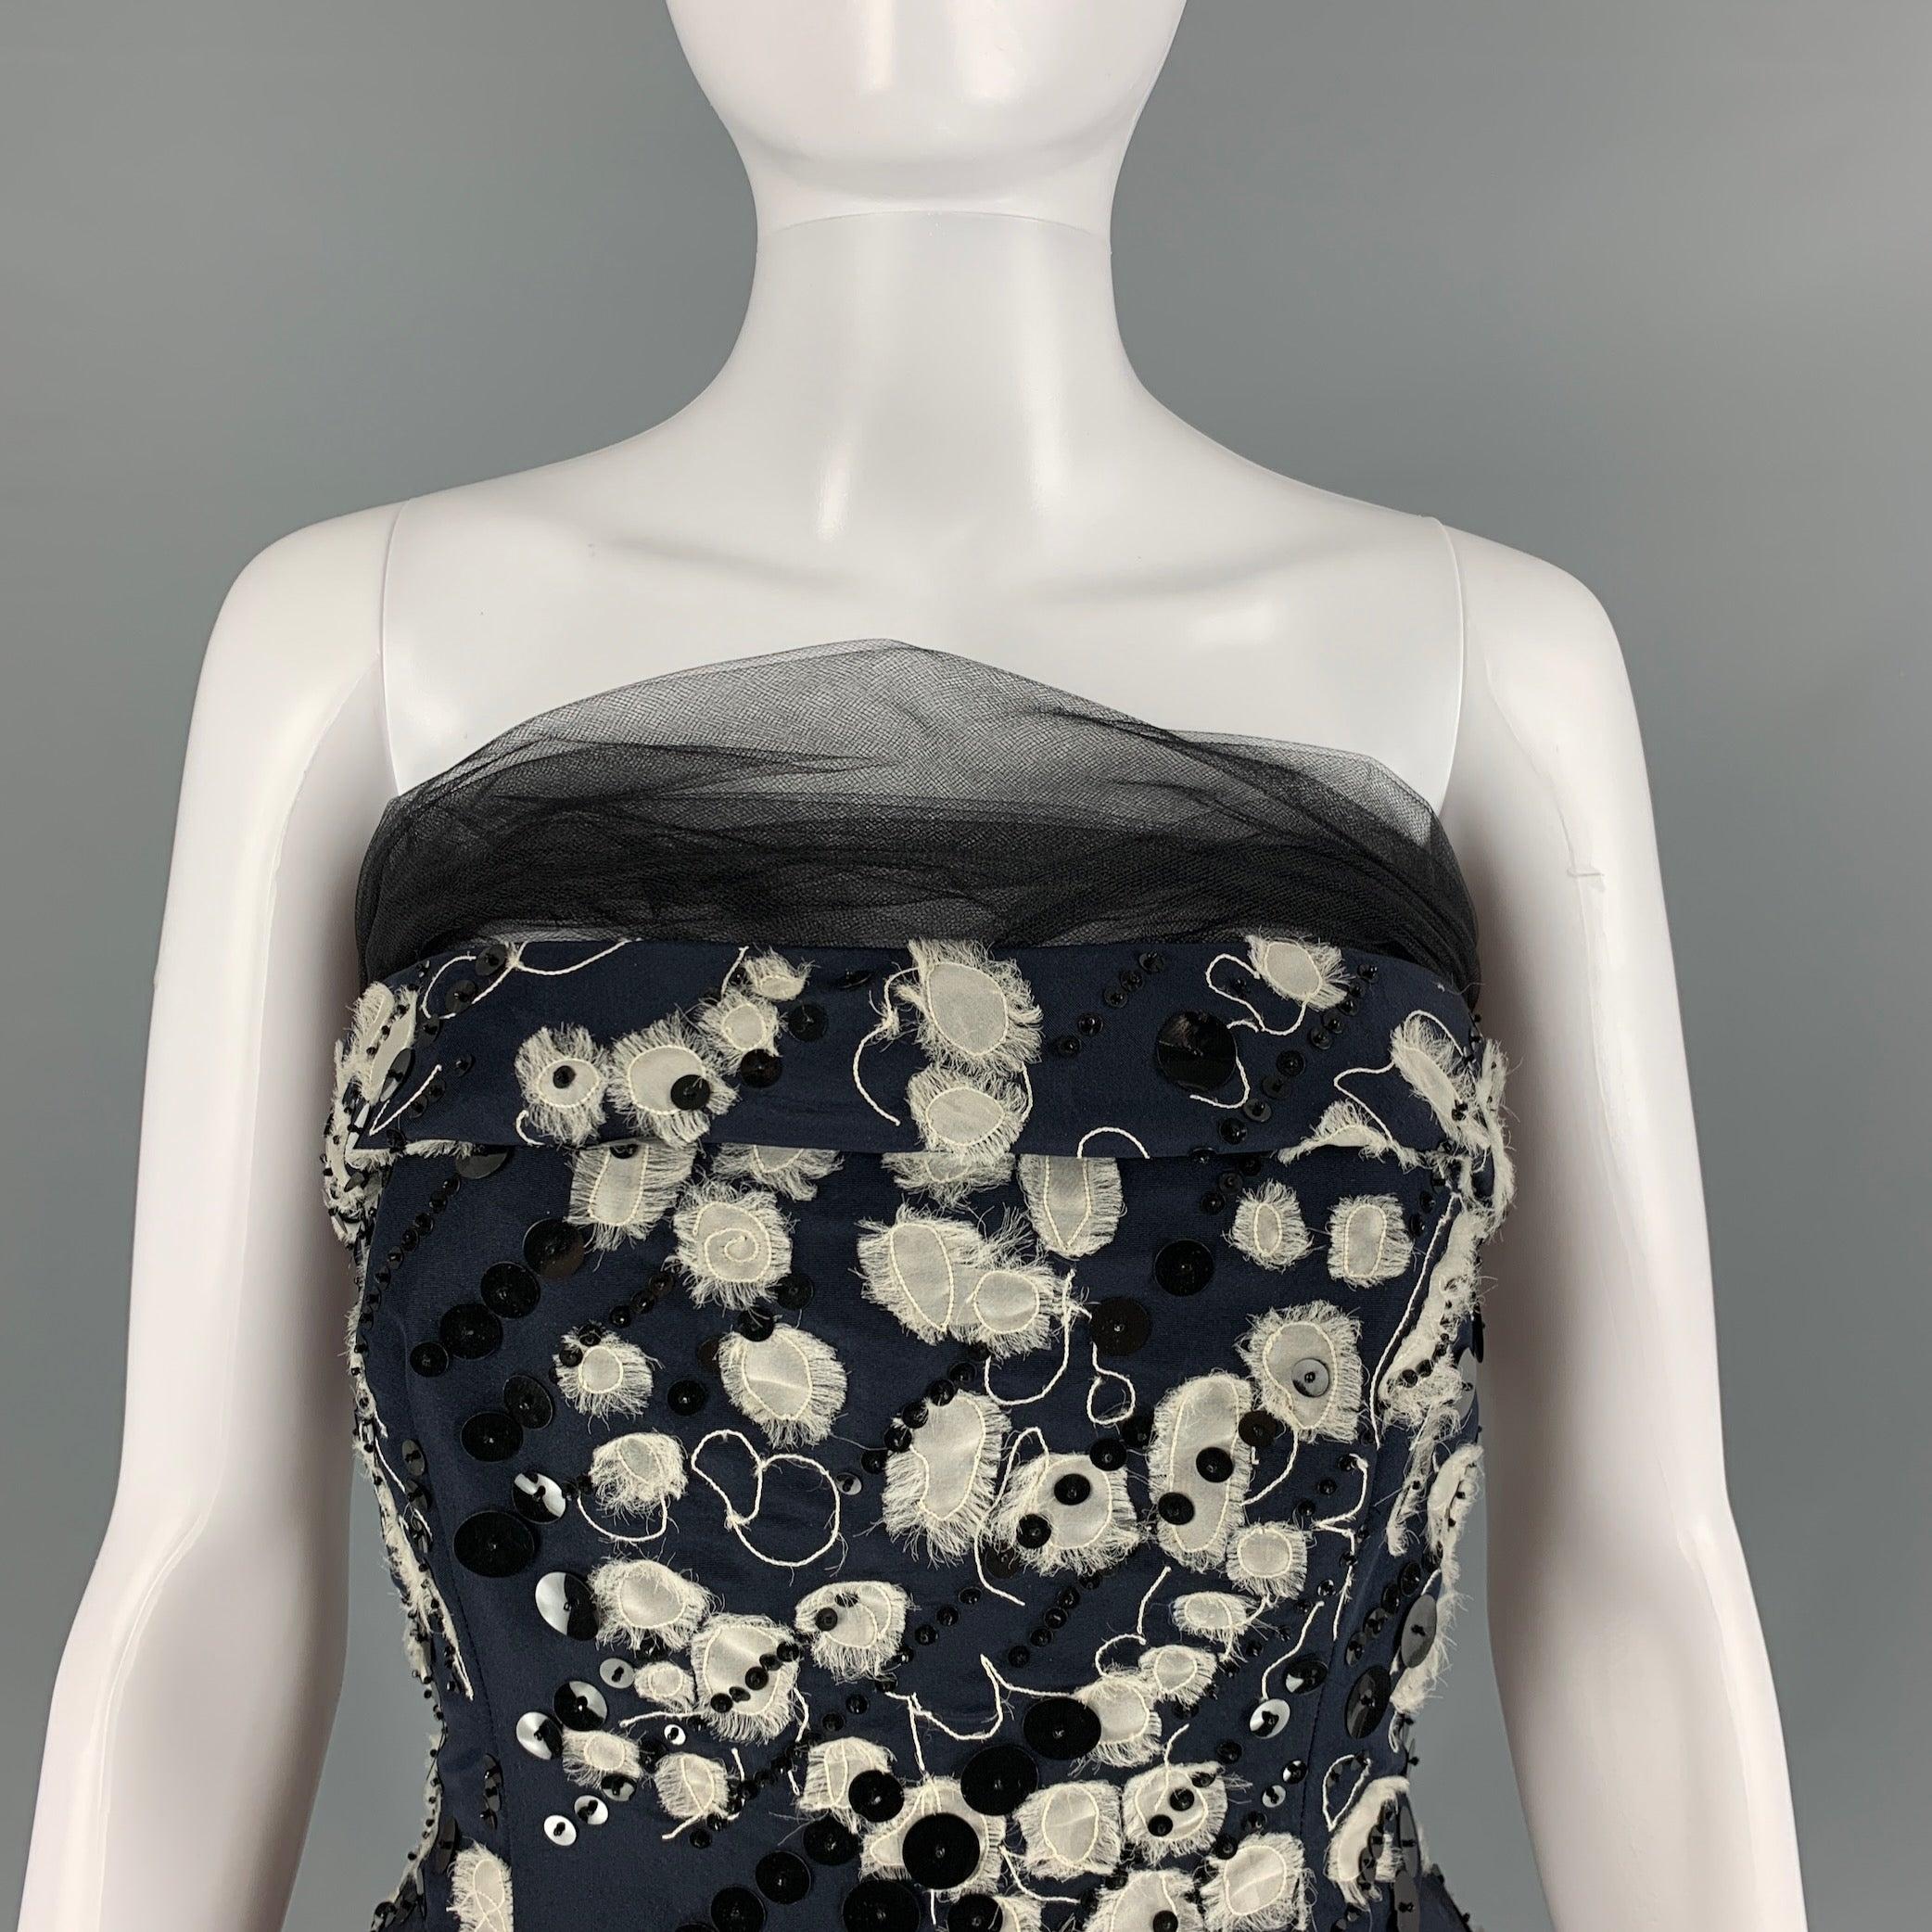 NAEEM KHAN custom made gown comes in a black & cream silk woven material featuring a strapless style, sequined details, a-line skirt, tulle at neckline and a side zipper closure. Made in USA.Very Good Pre-Owned Condition. Brand Tag Removed.